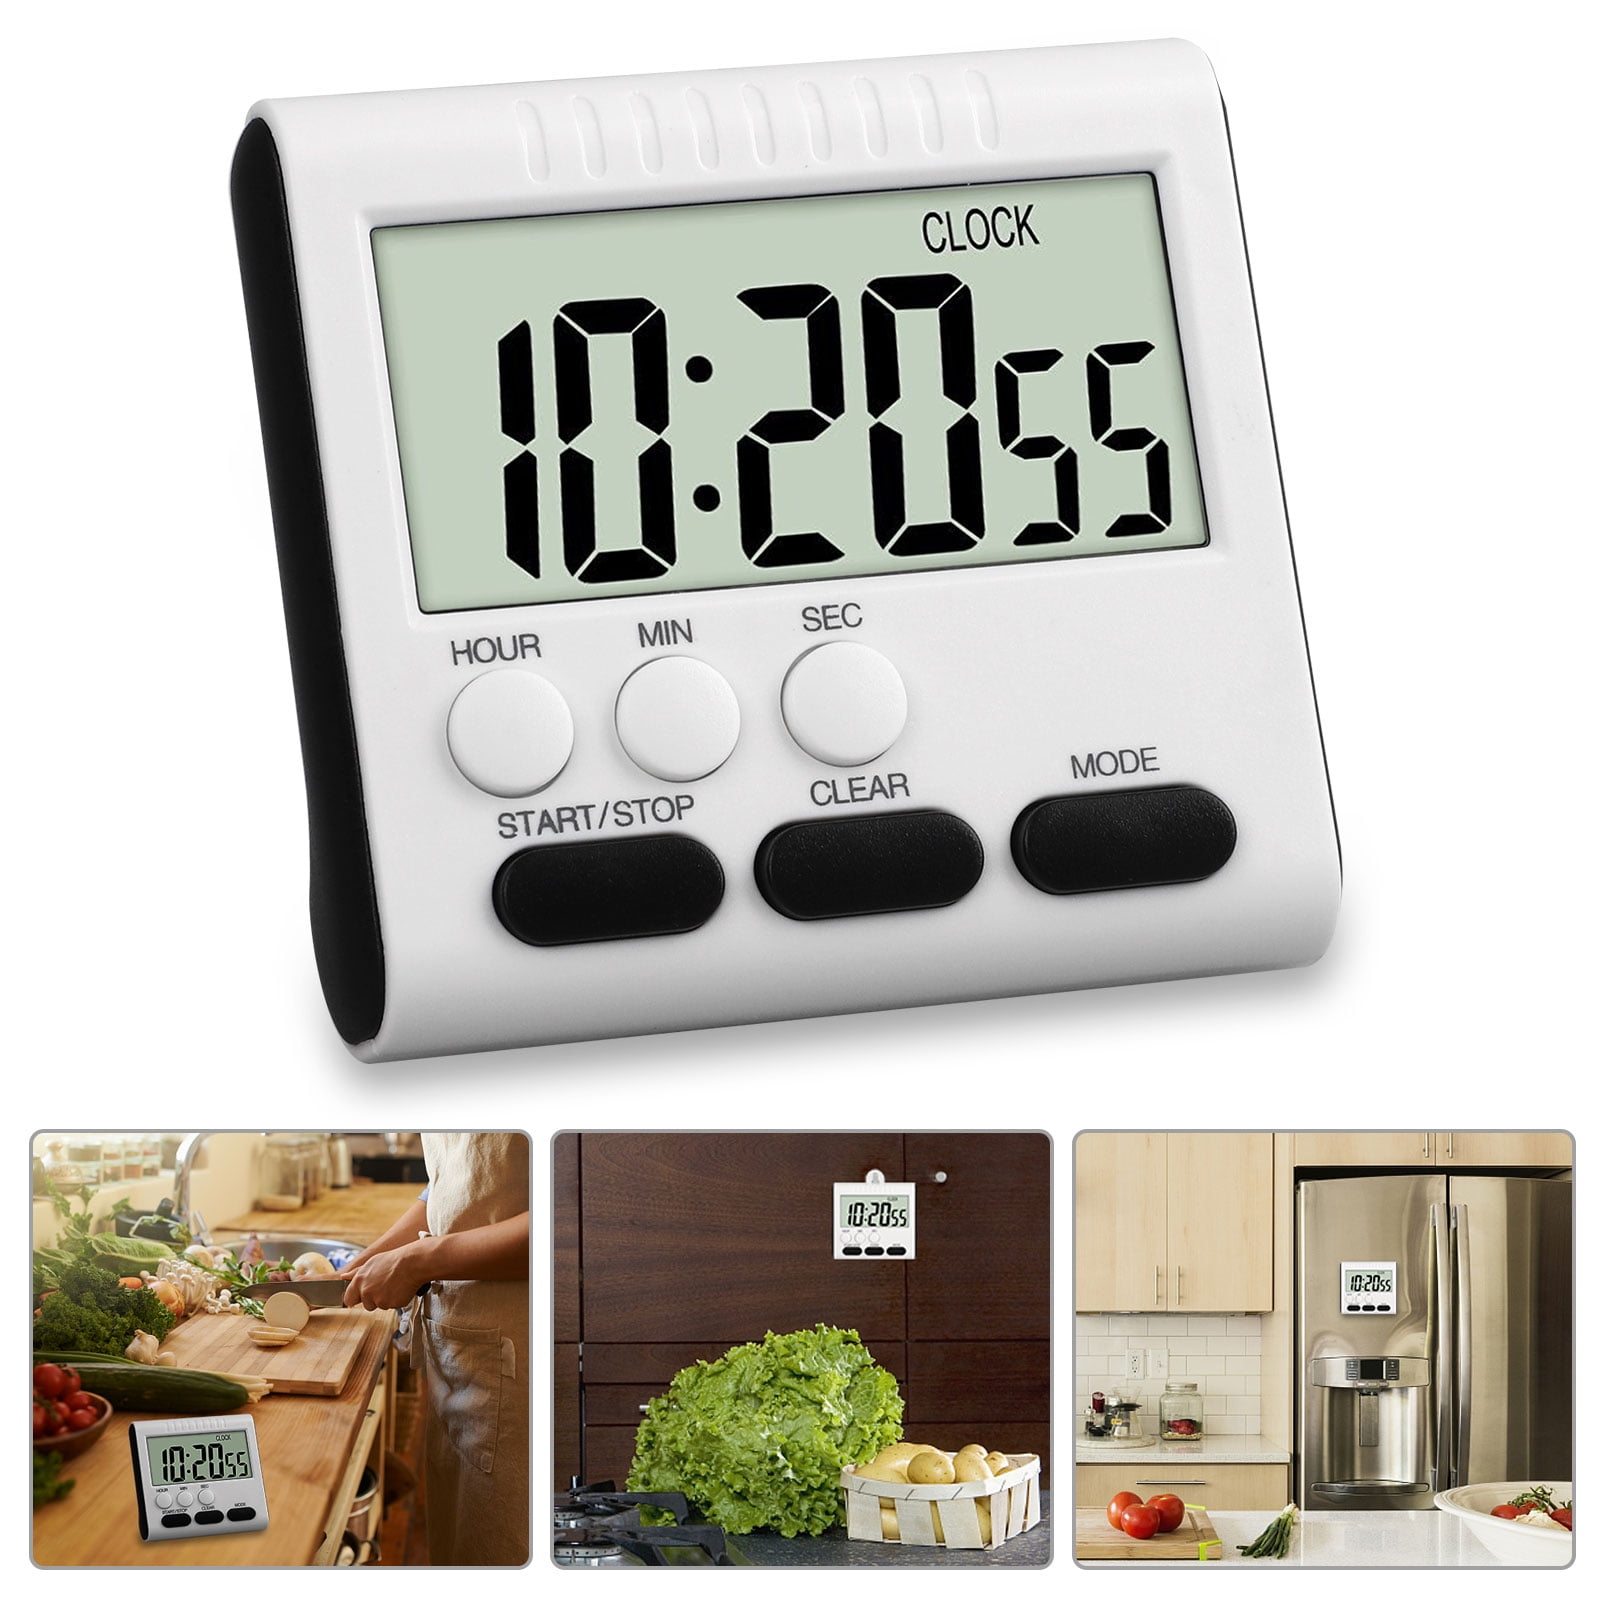 DIGITAL COOKING KITCHEN TIMER COUNT UP DOWN MAGNETIC BACK FREE STANDING 